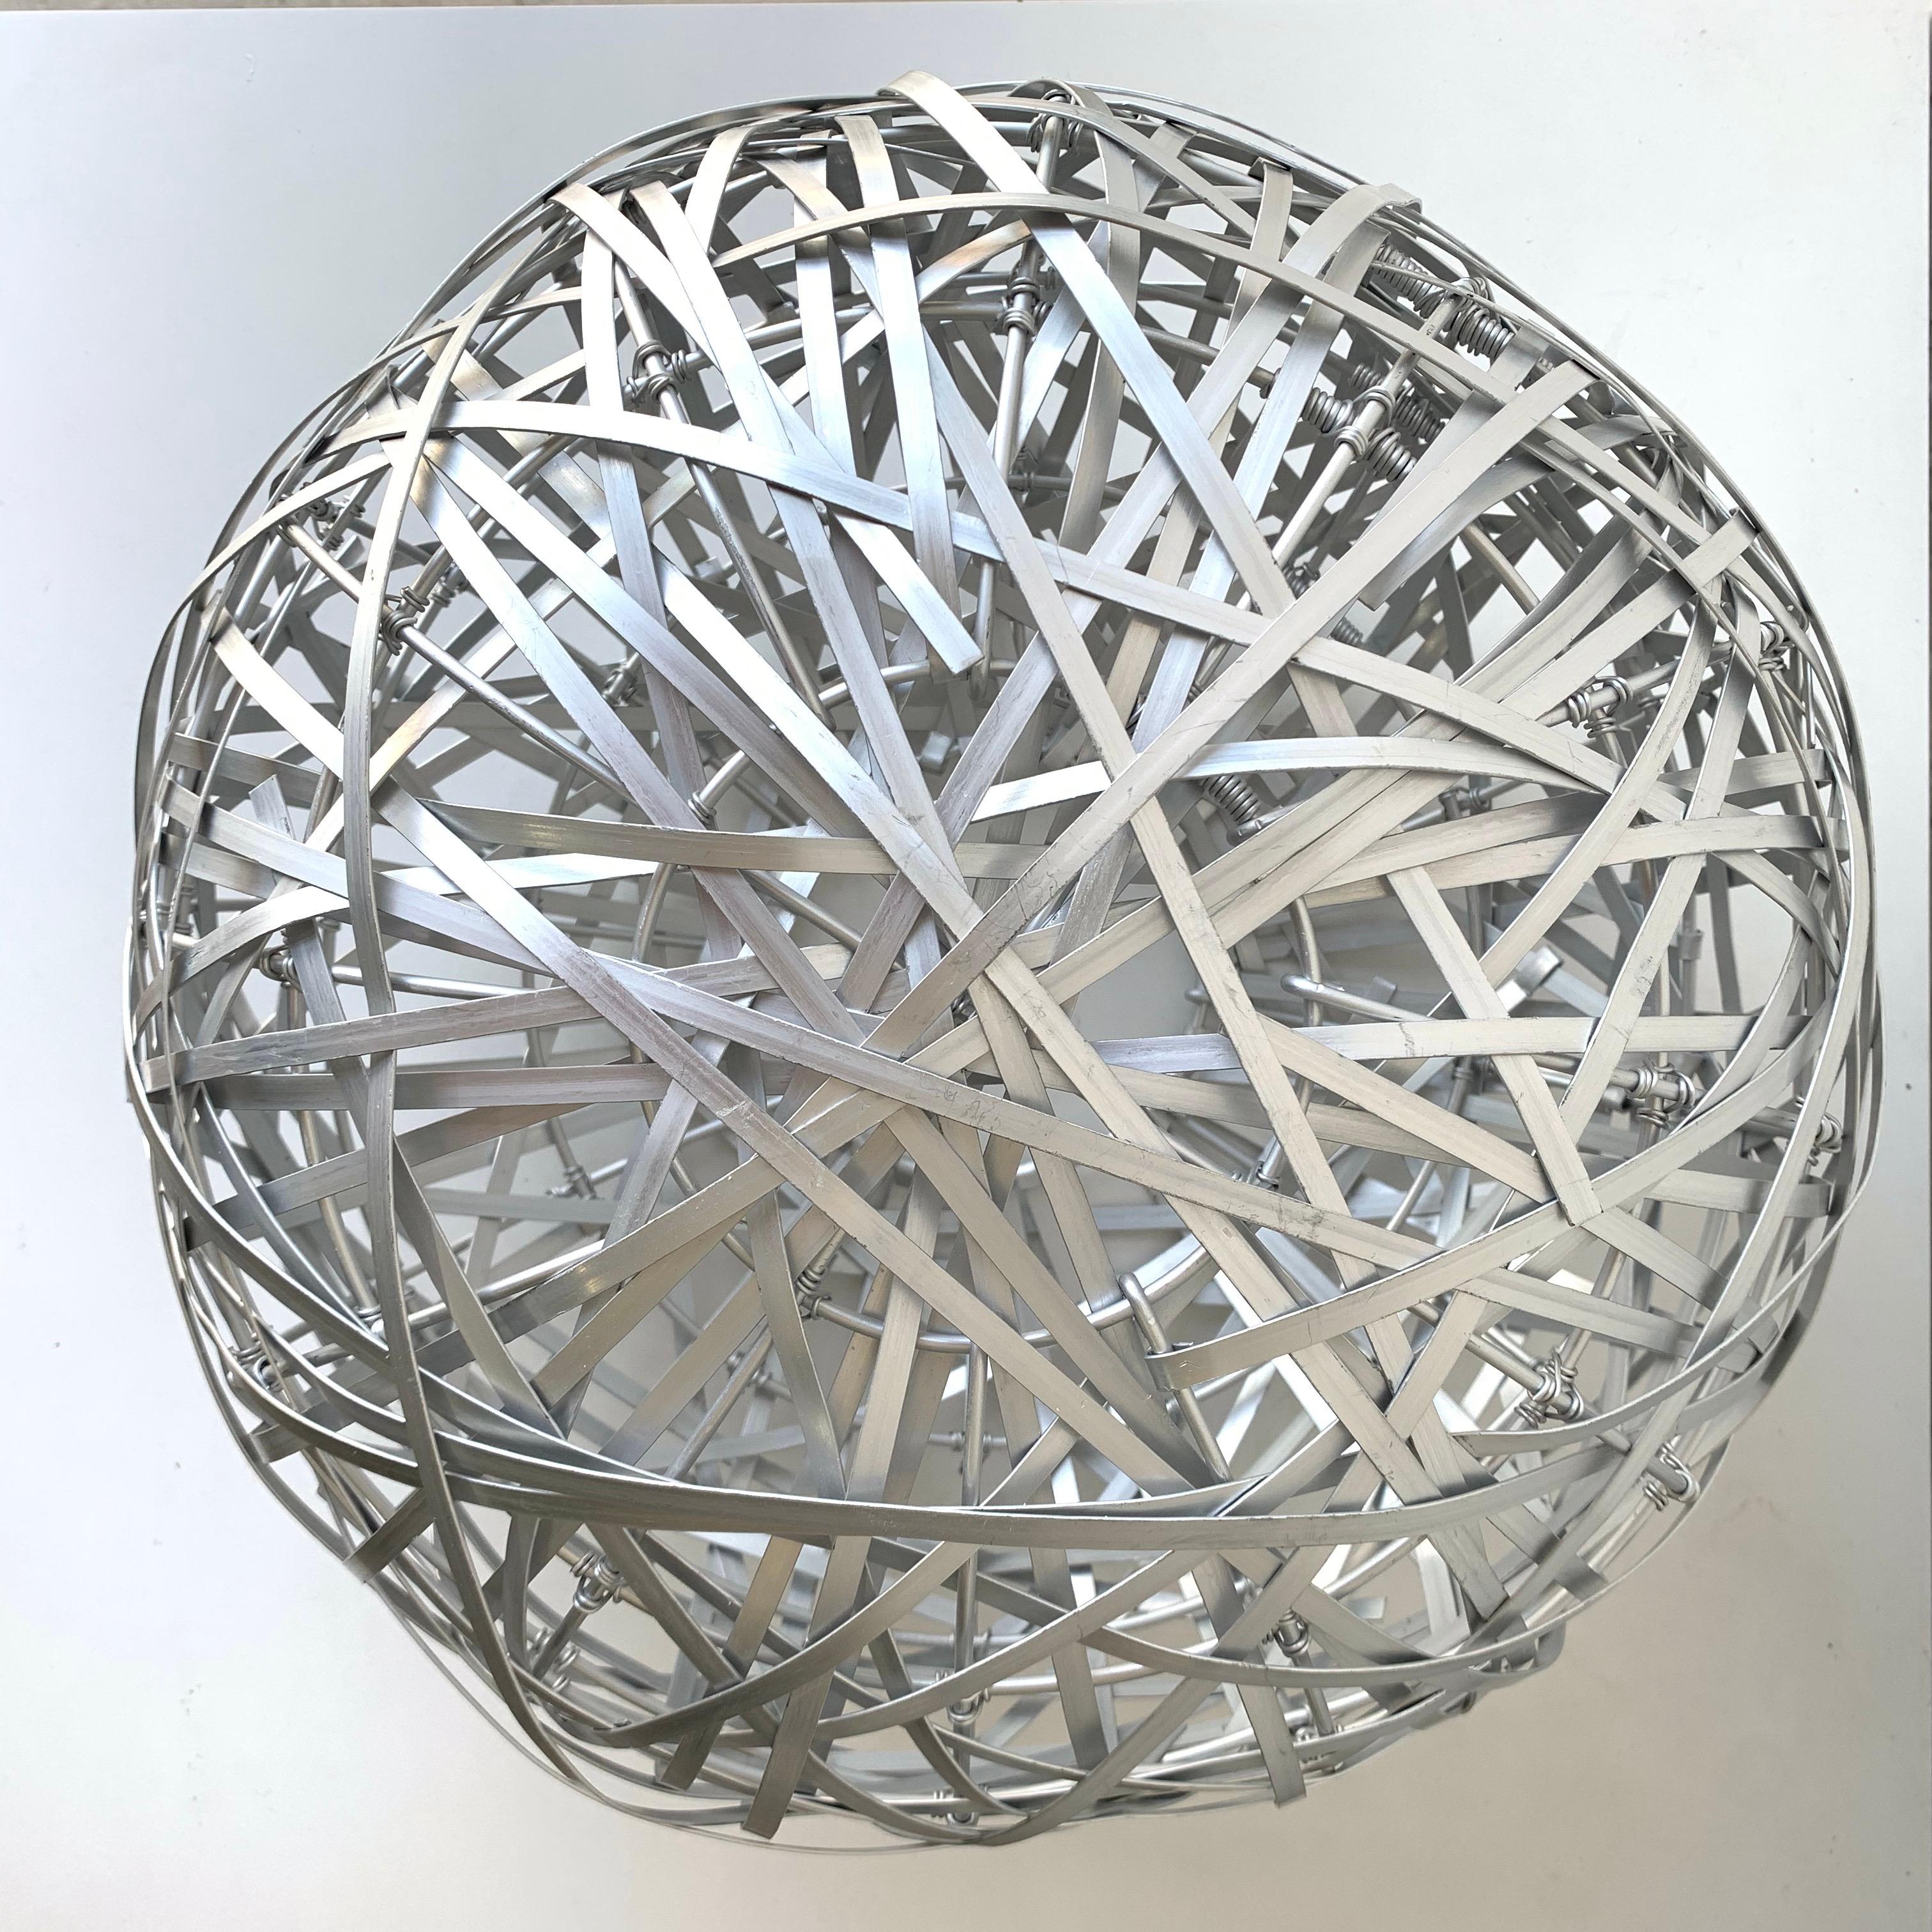 Brazilian Modern Sculptural Woven Aluminum Basket Attributed to Campana Brothers 3